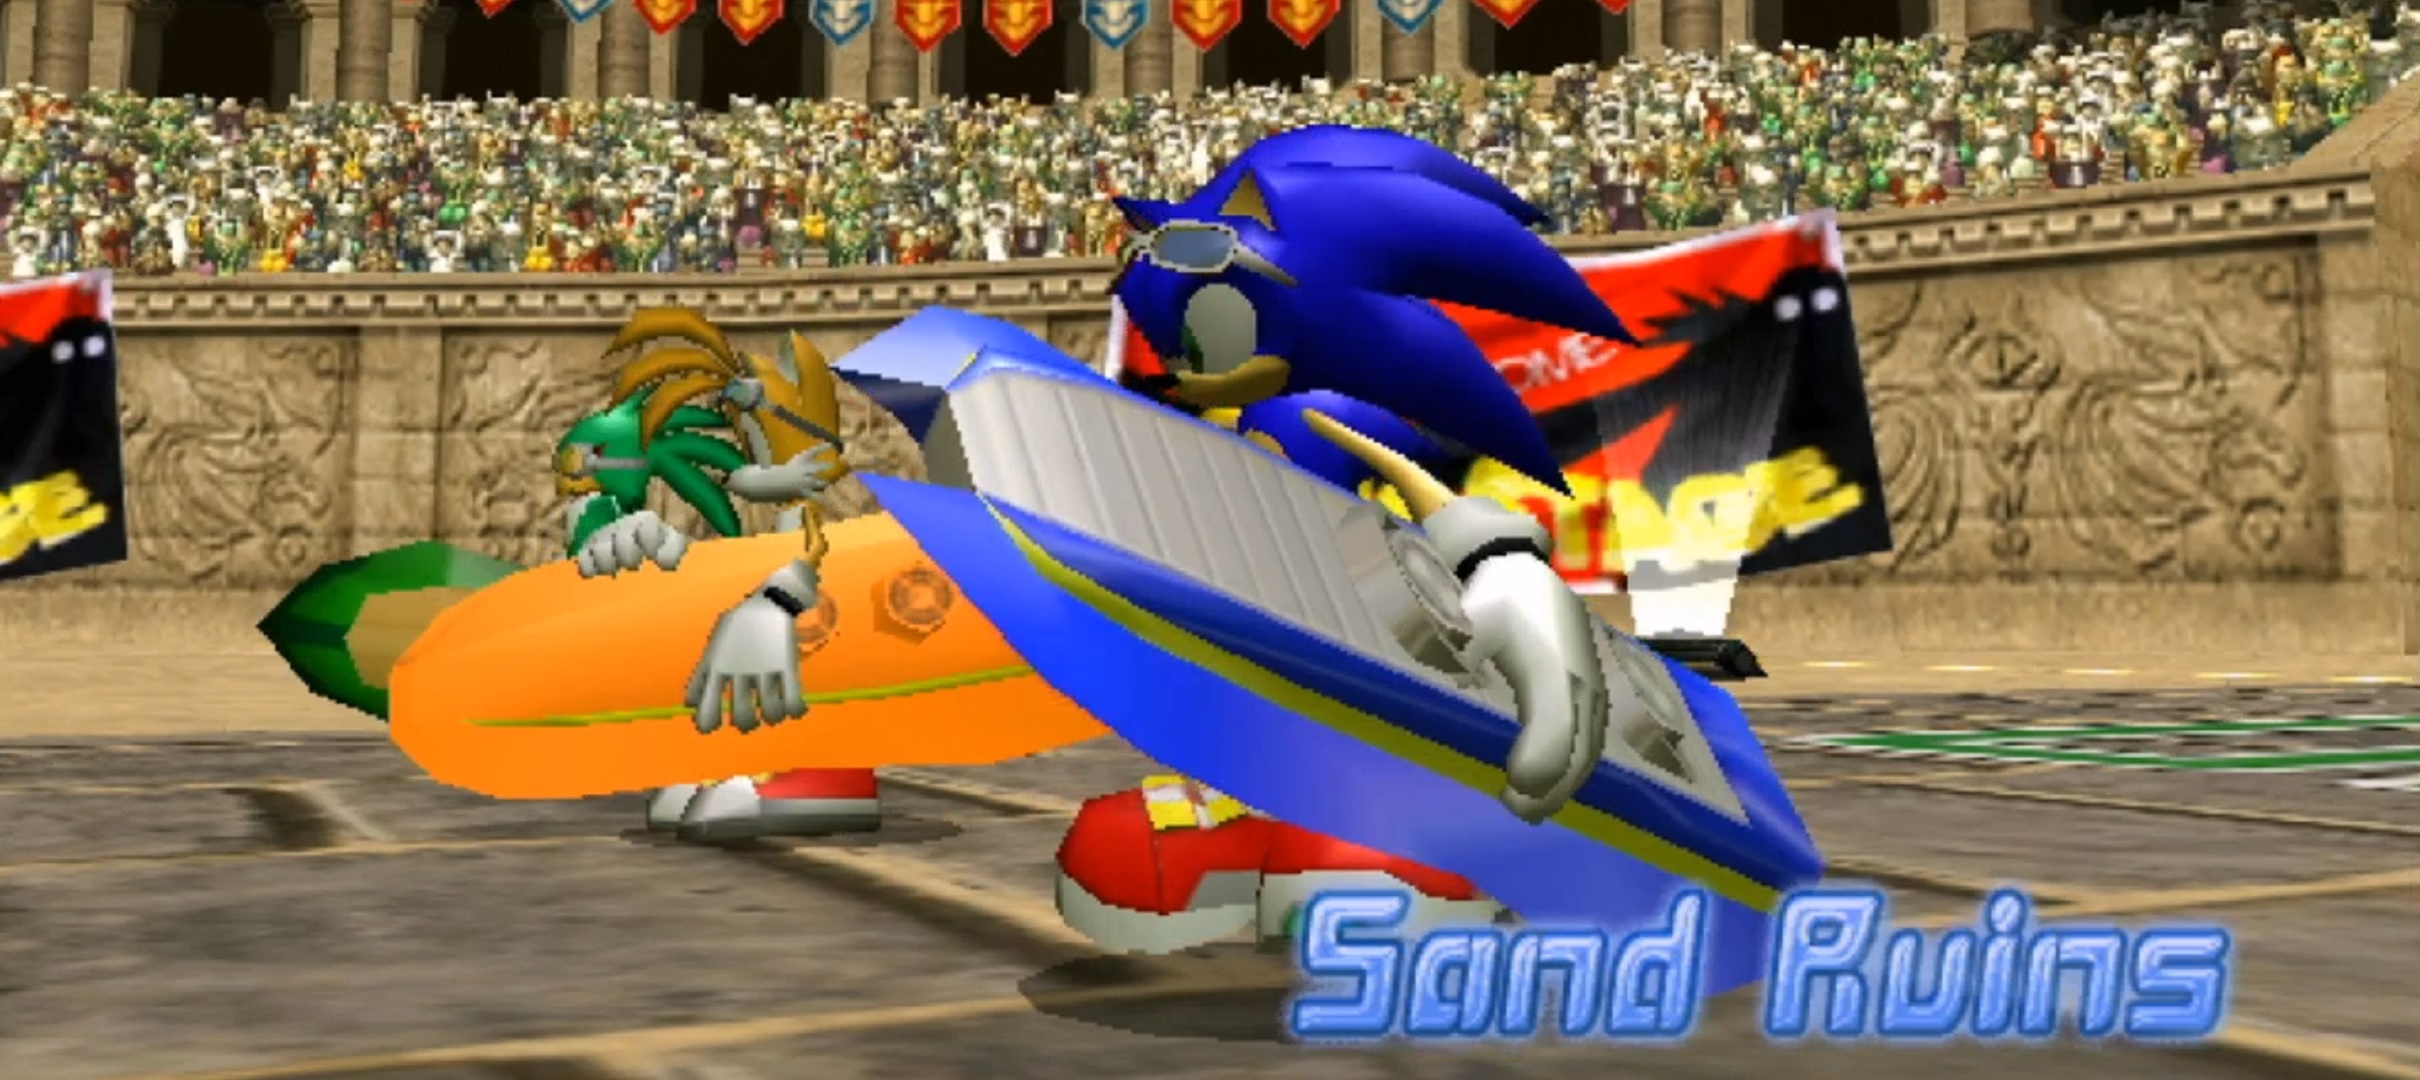 sonic riders pc 2 players only